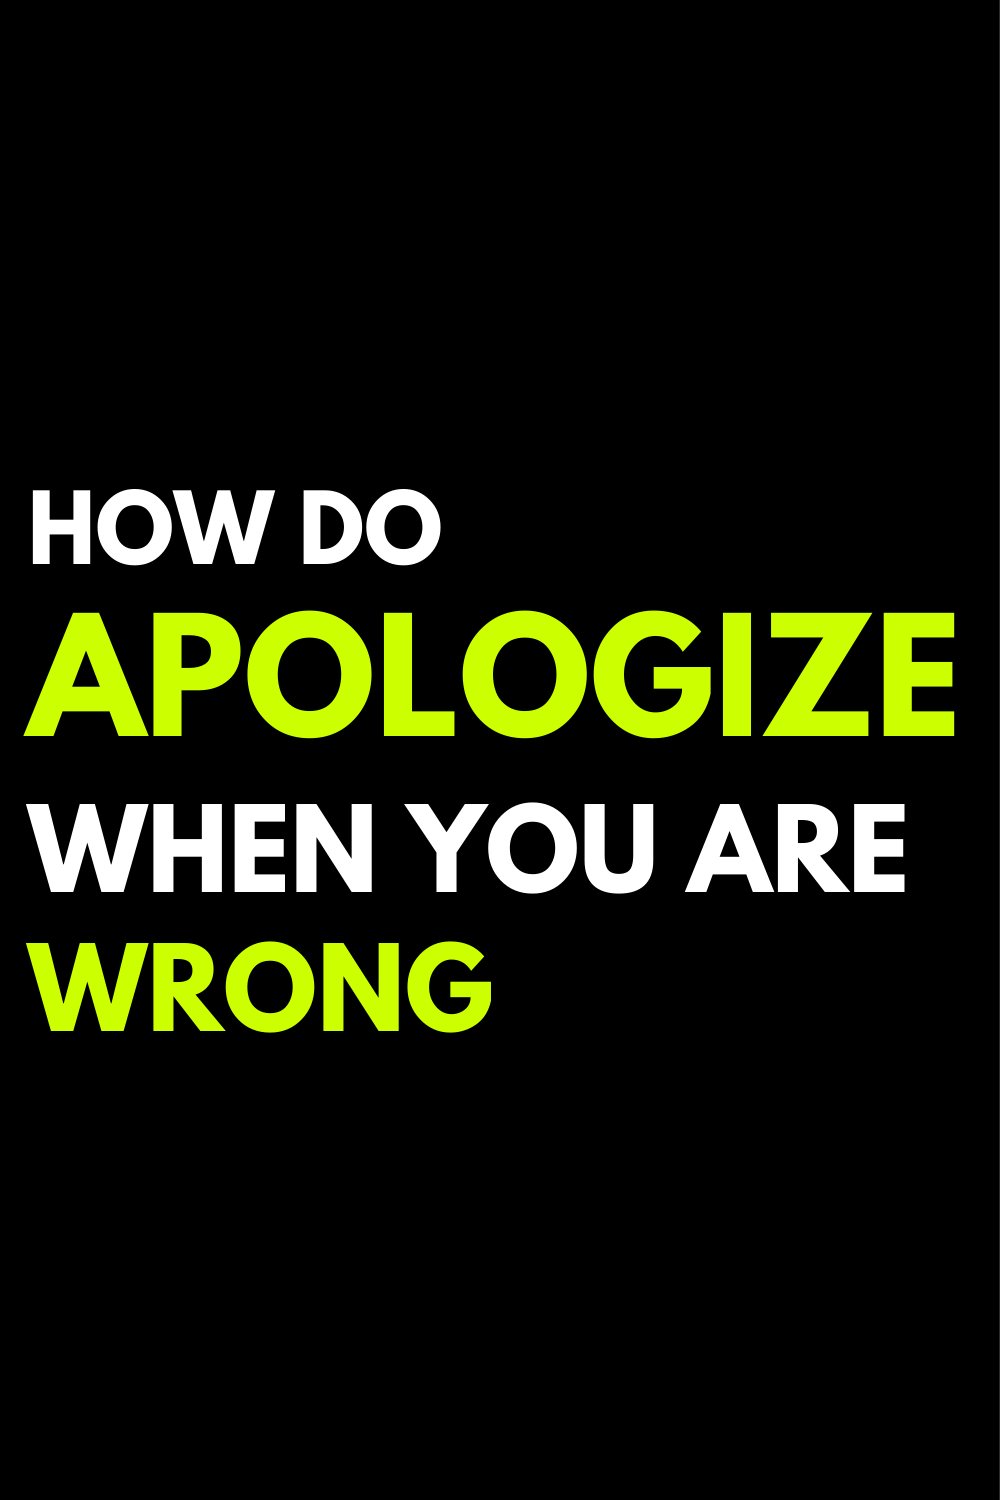 How do apologize when you are wrong